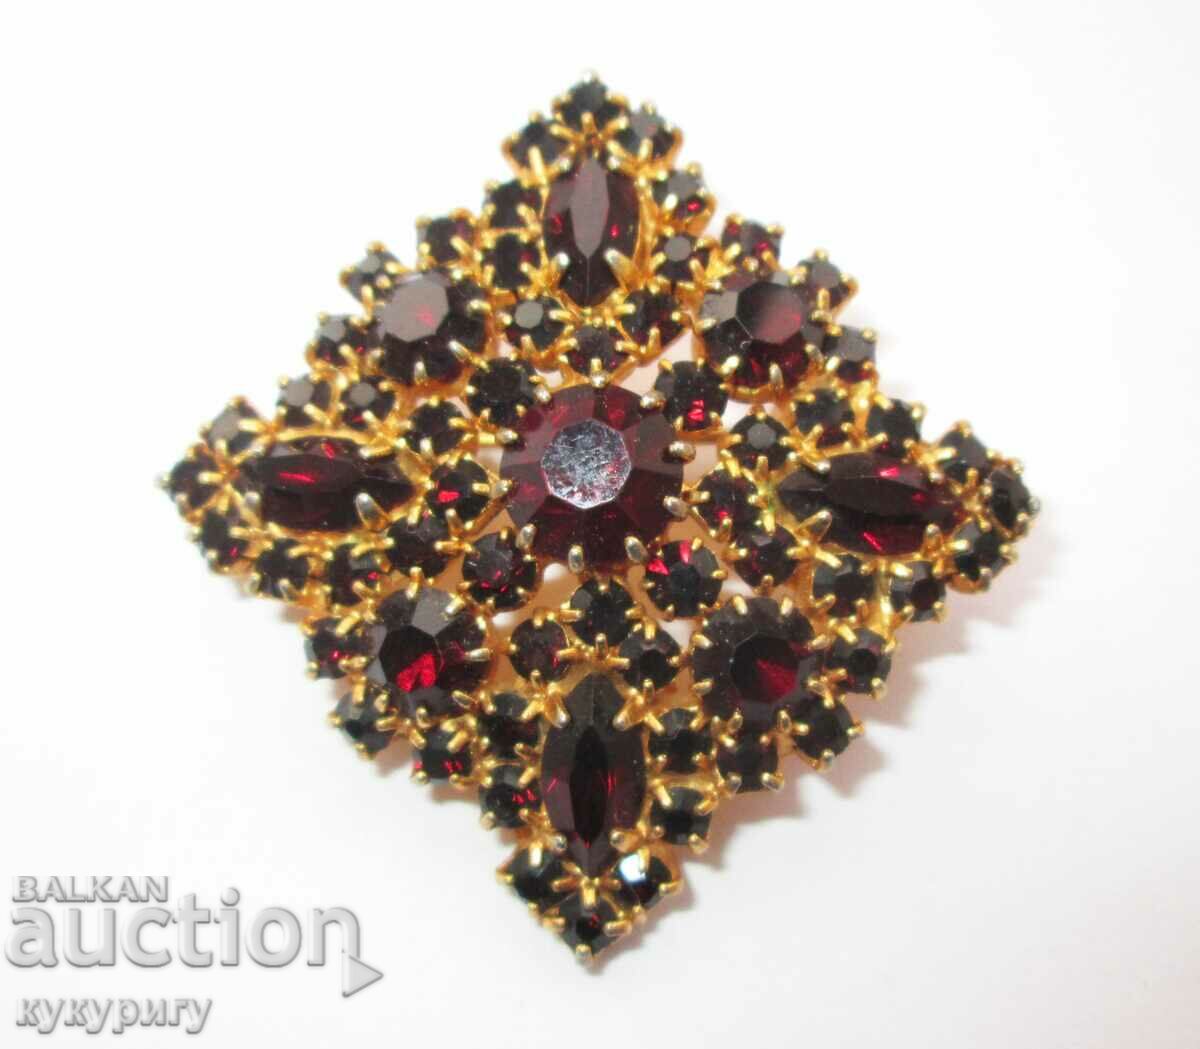 A beautiful old lady's gold-plated brooch with garnet stones